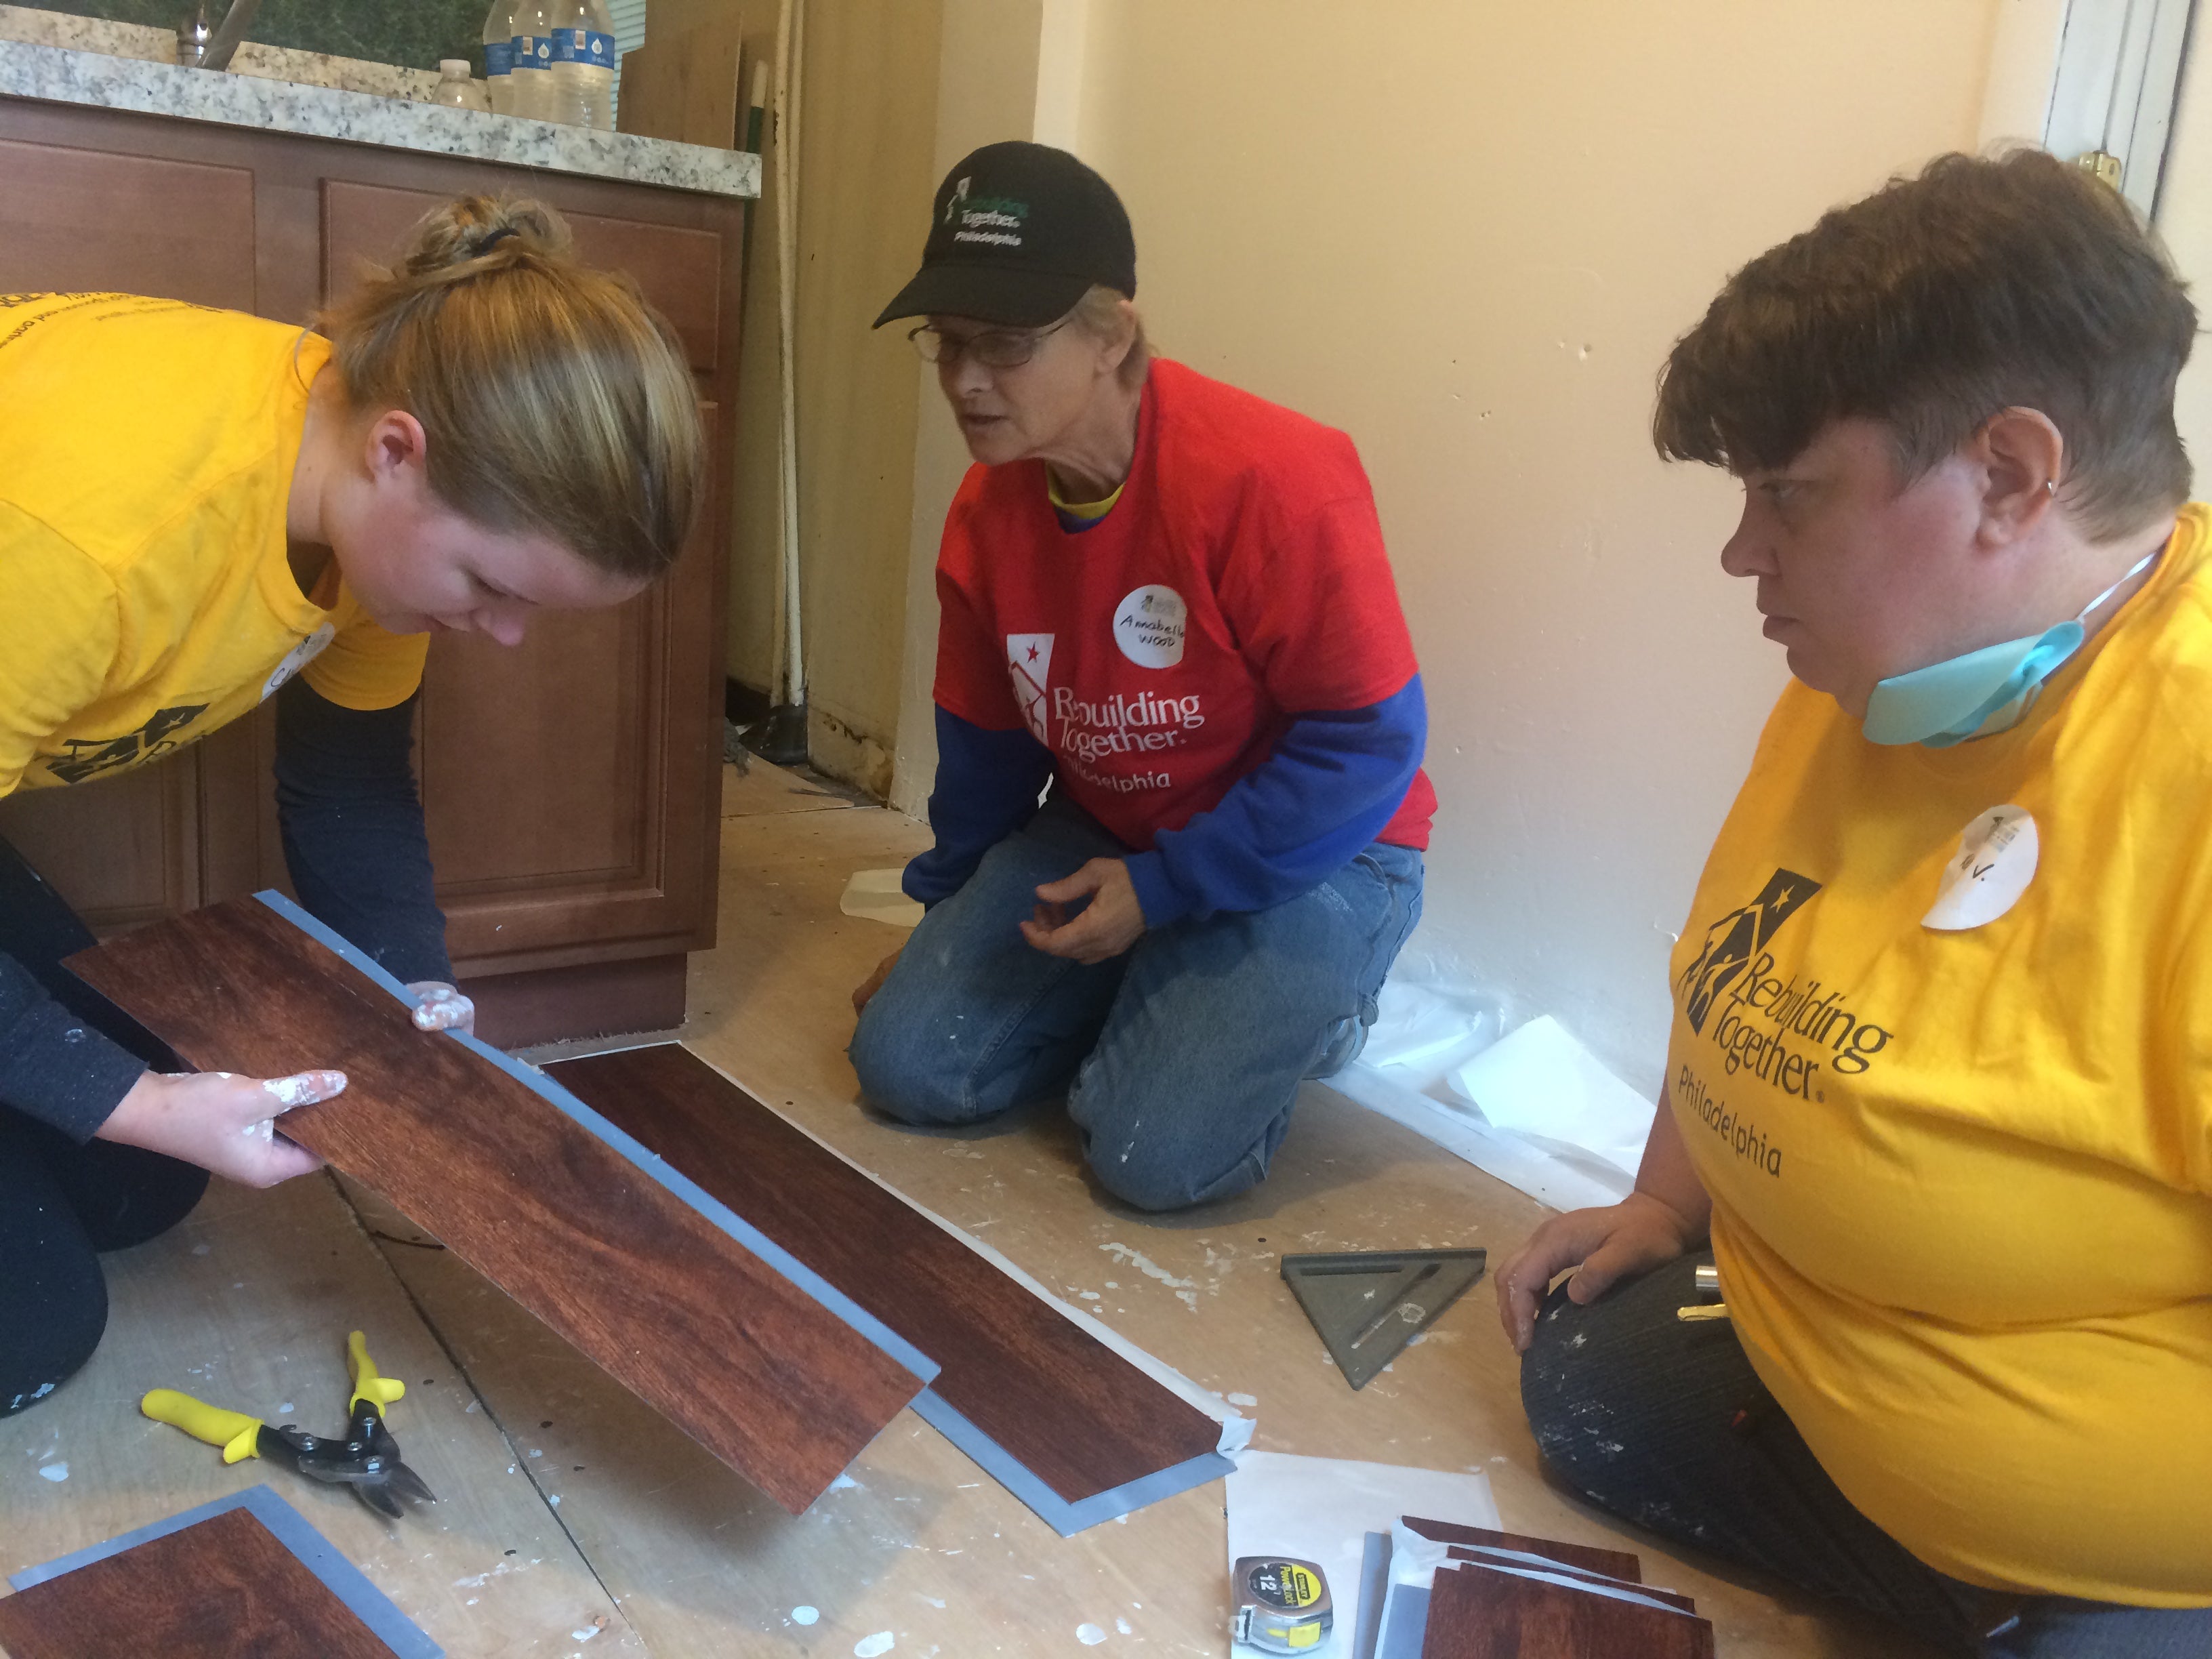 Annabella Wood, 57, (in red) installing new floor on Dawn Anderson’s kitchen, with full-time handywoman Kelly Vincent, 42, and volunteer Kaylin Viales, 23 | Catalina Jaramillo / PlanPhilly